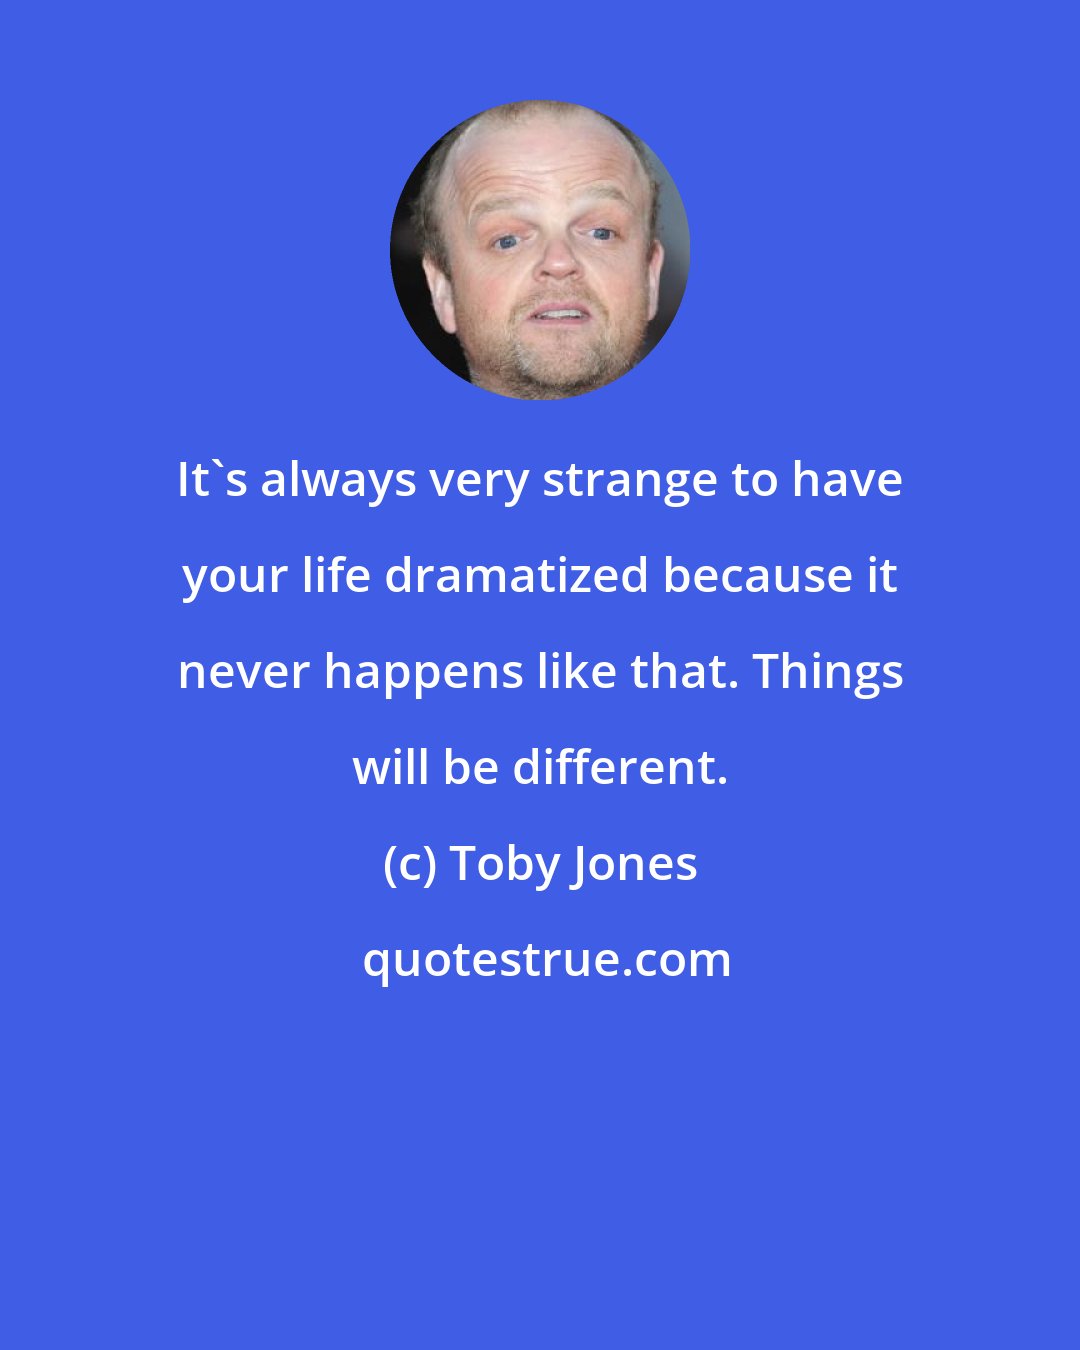 Toby Jones: It's always very strange to have your life dramatized because it never happens like that. Things will be different.